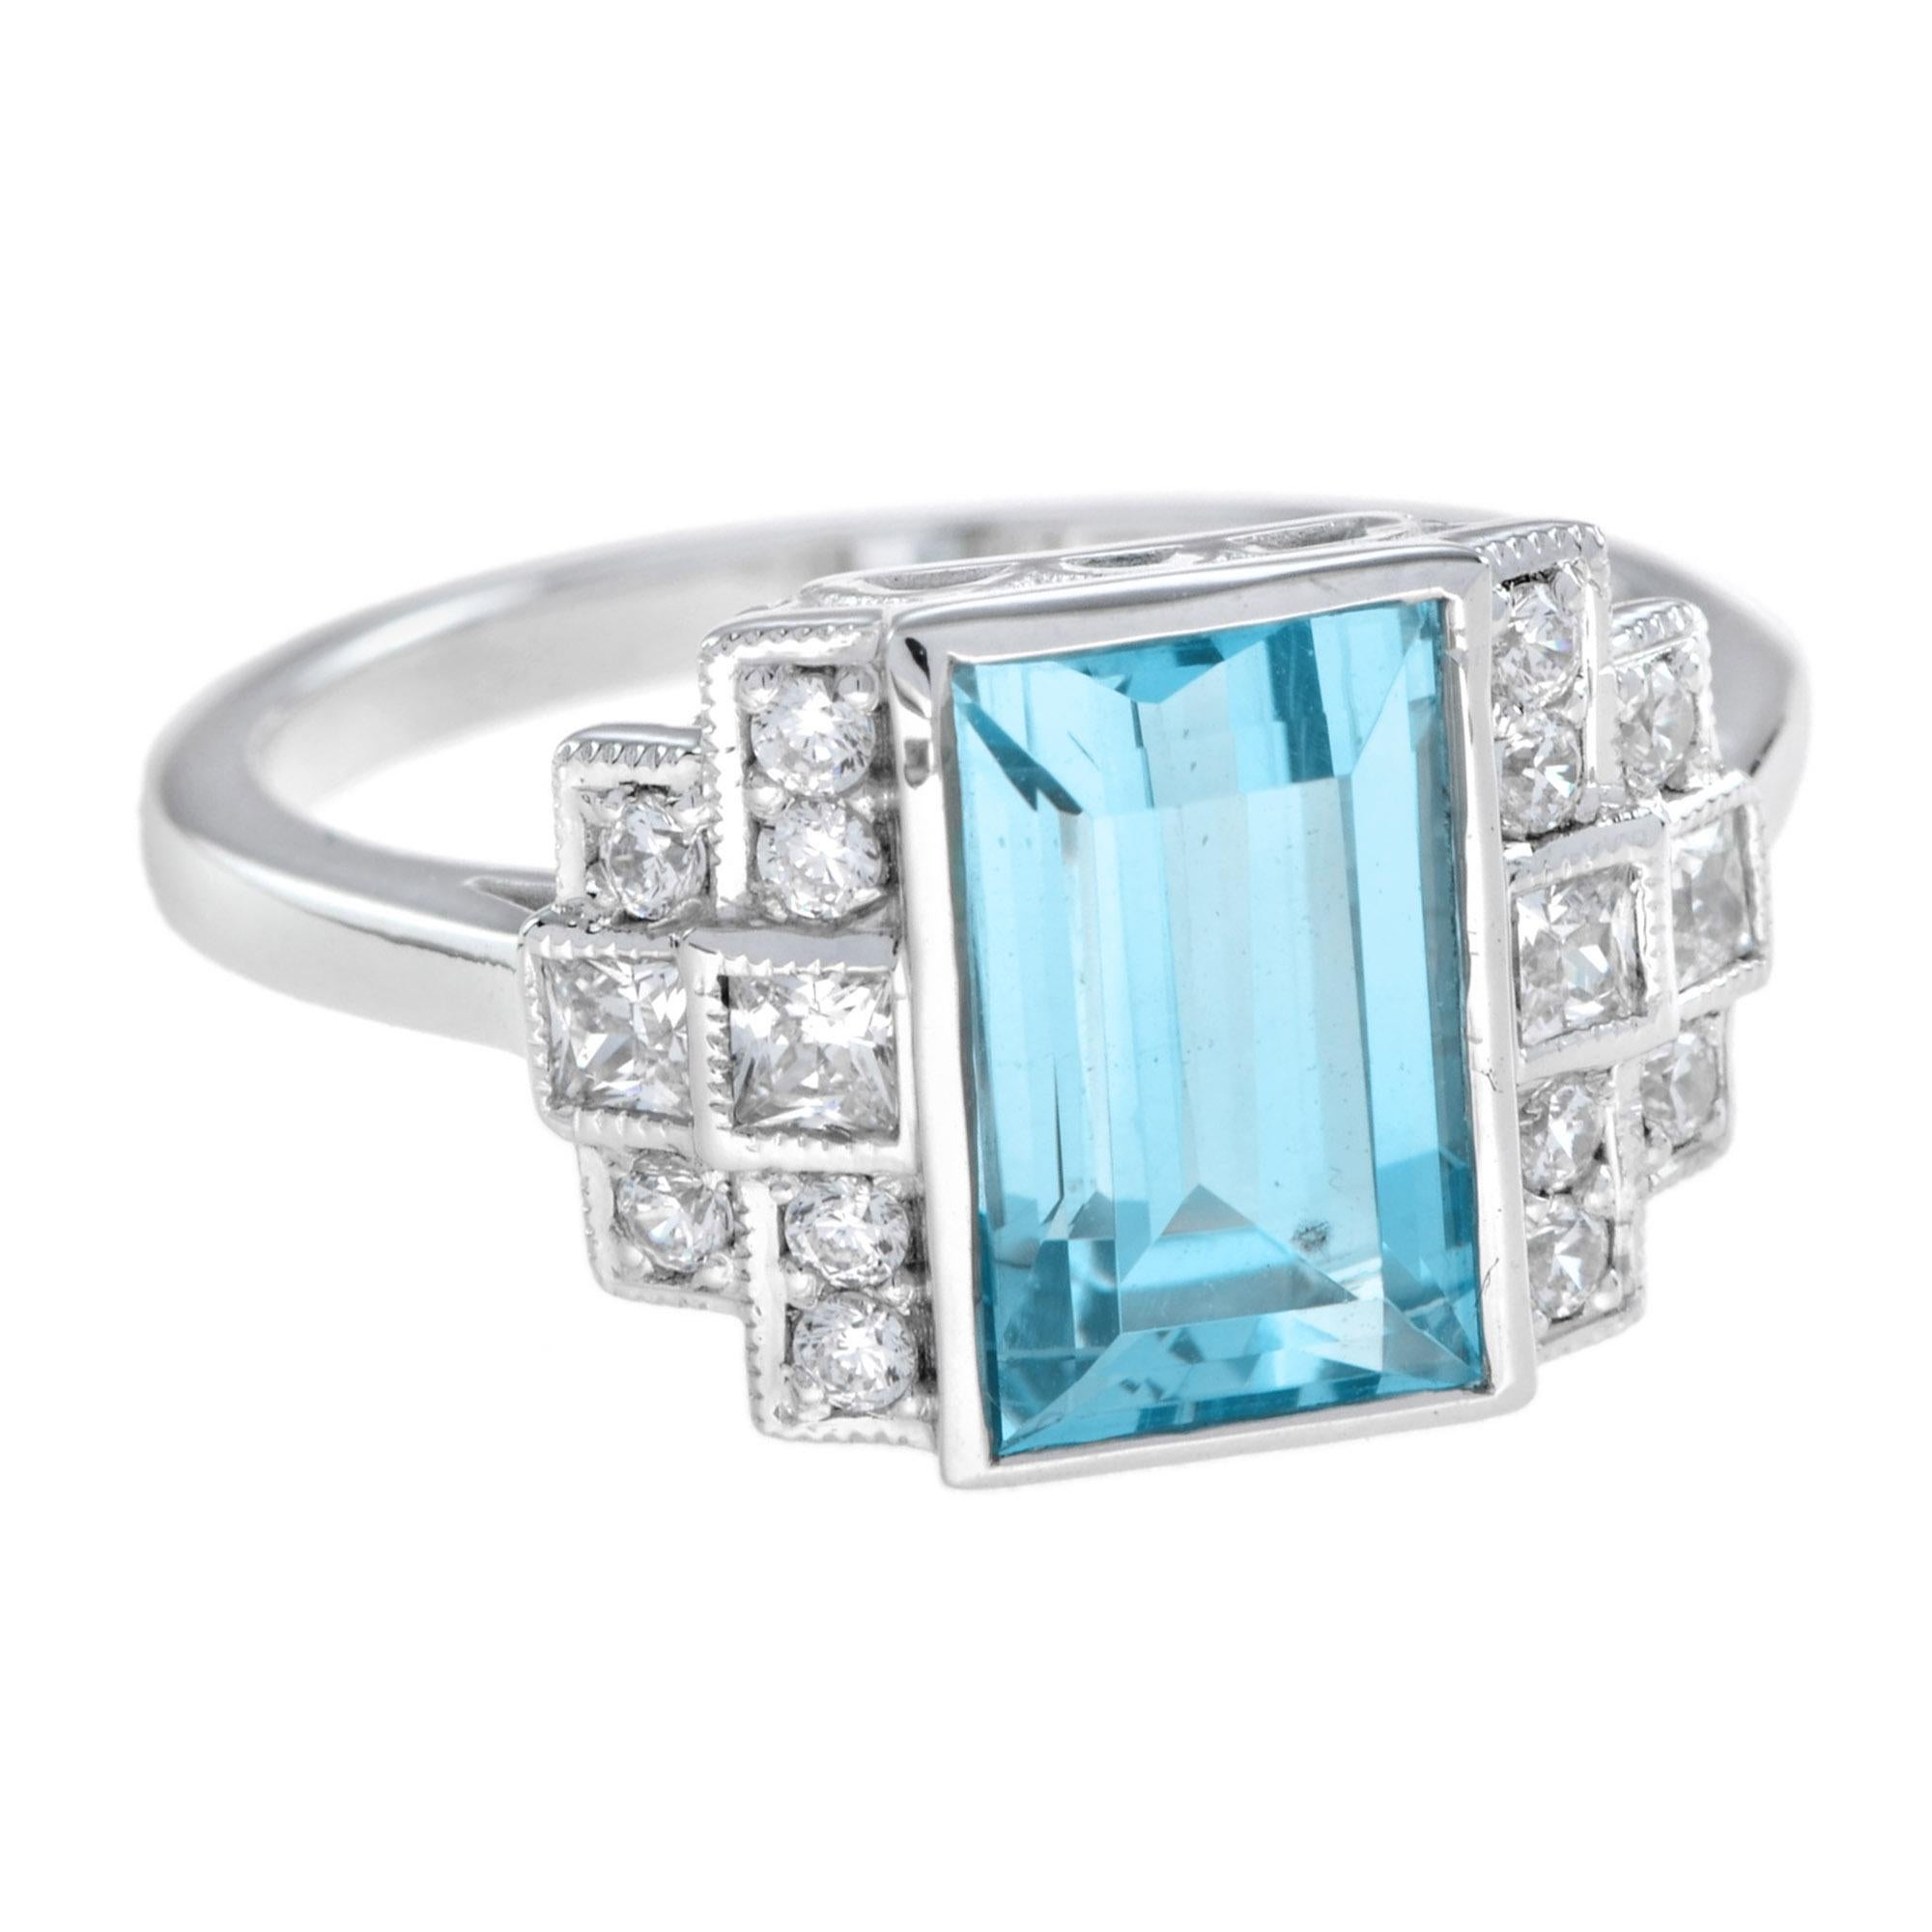 Emerald Cut 3.50 Ct. Aquamarine and Diamond Art Deco Style Cocktail Ring in 18K White Gold For Sale